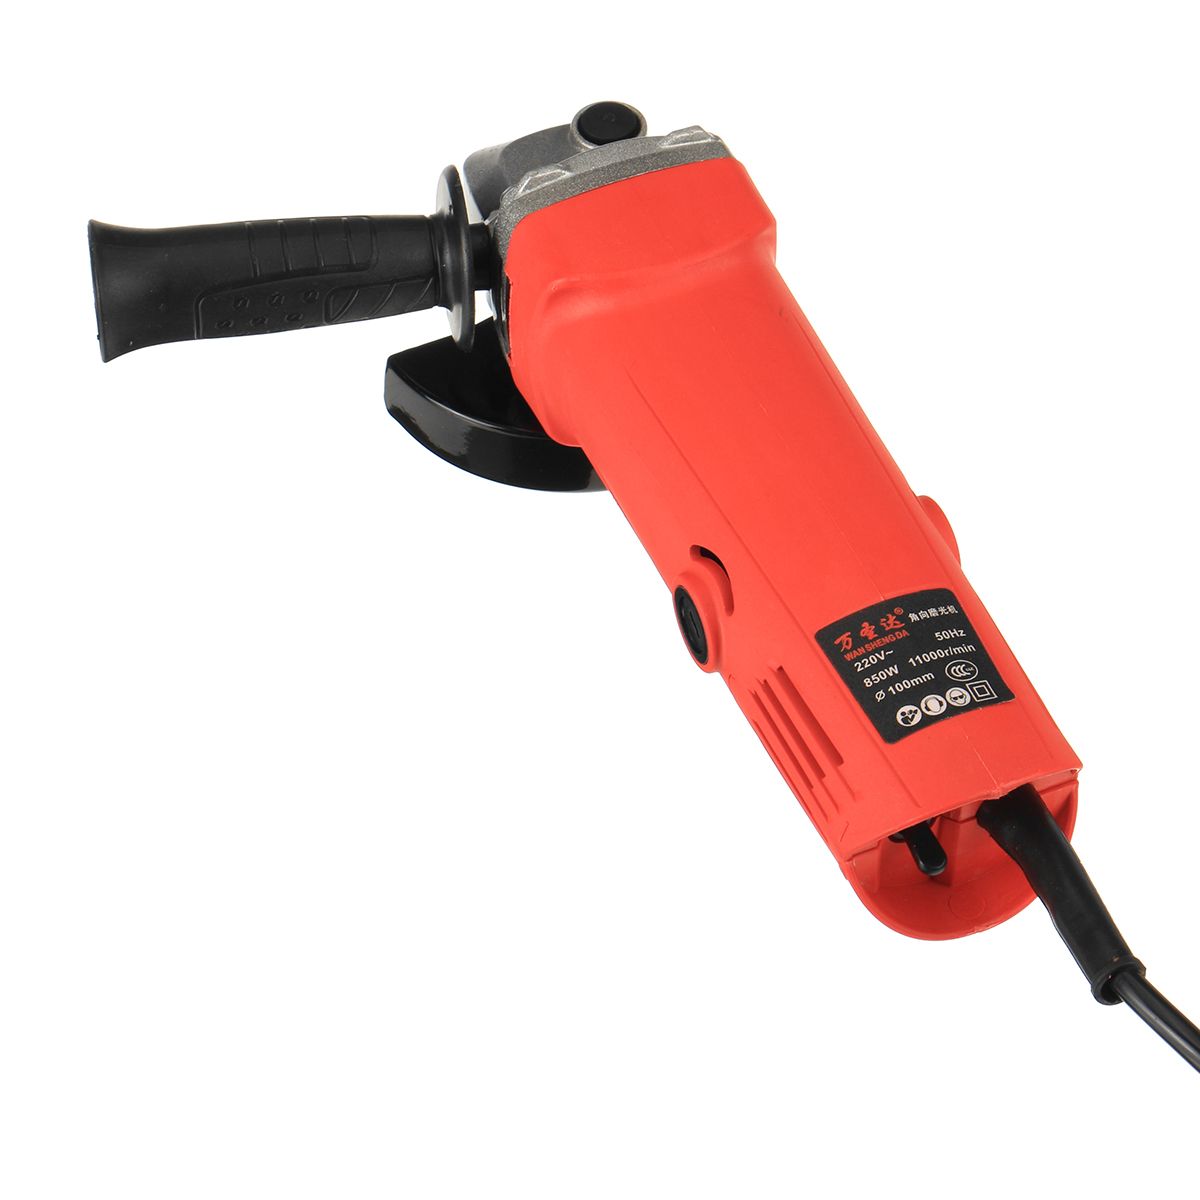 850W-100mm-11000rpm-Electric-Angle-Grinder-Cutting-Machine-Handheld-Polishing-Grinding-Carving-Tool-1736781